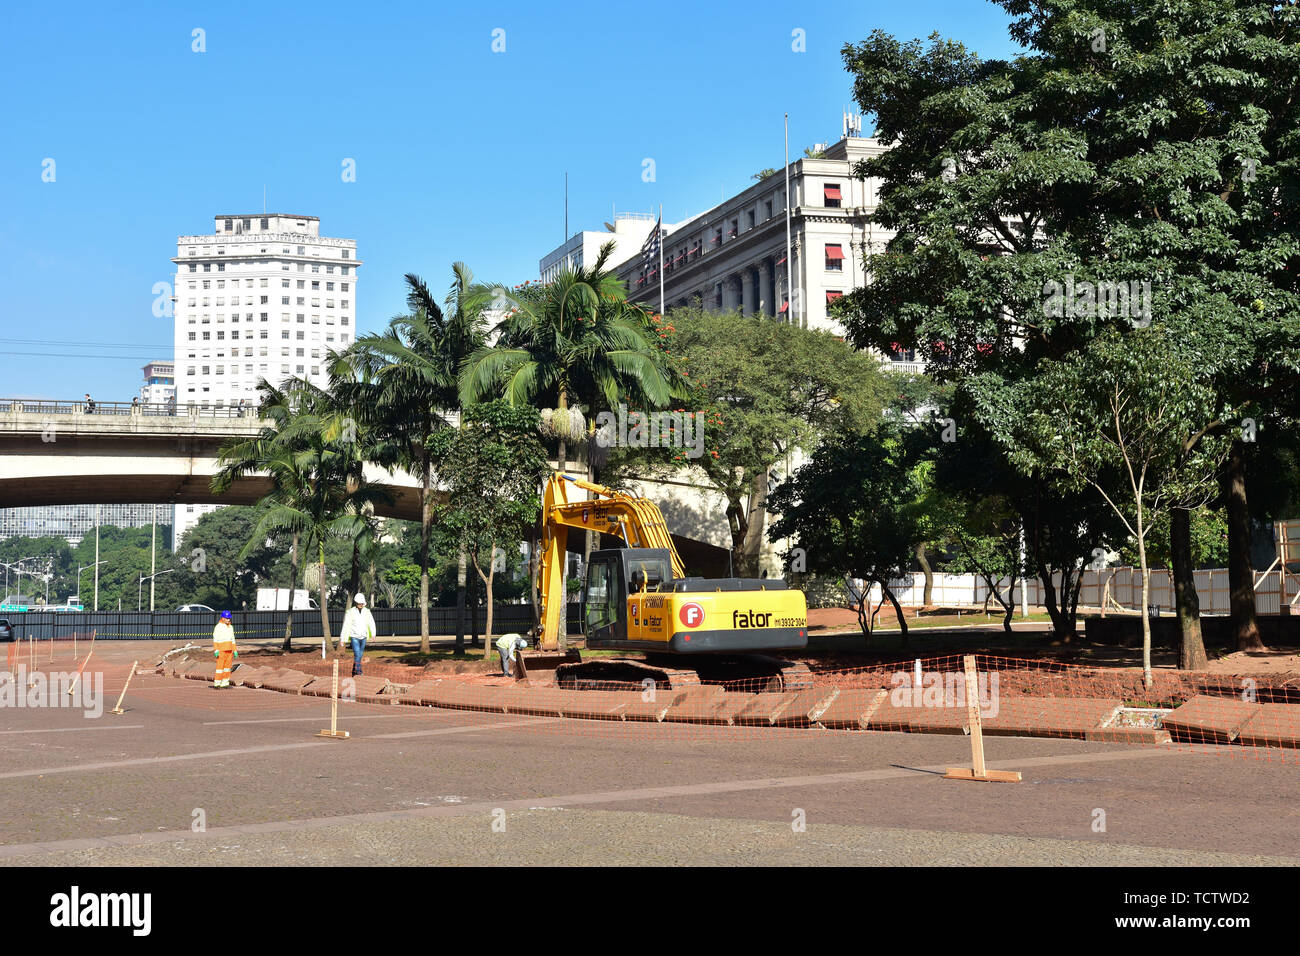 SÃO PAULO, SP - 10.06.2019: REQUALIFICAÇÃO DO VALE DO ANHANGABAÚ - Works of requalification of the Valley of the Anhangabaú, this Monday (10) the place will receive cafes, floricultures, toilets, playroom, among other activities that will make part of the daily life of the Va (Photo: Roberto Casimiro/Fotoarena) Stock Photo